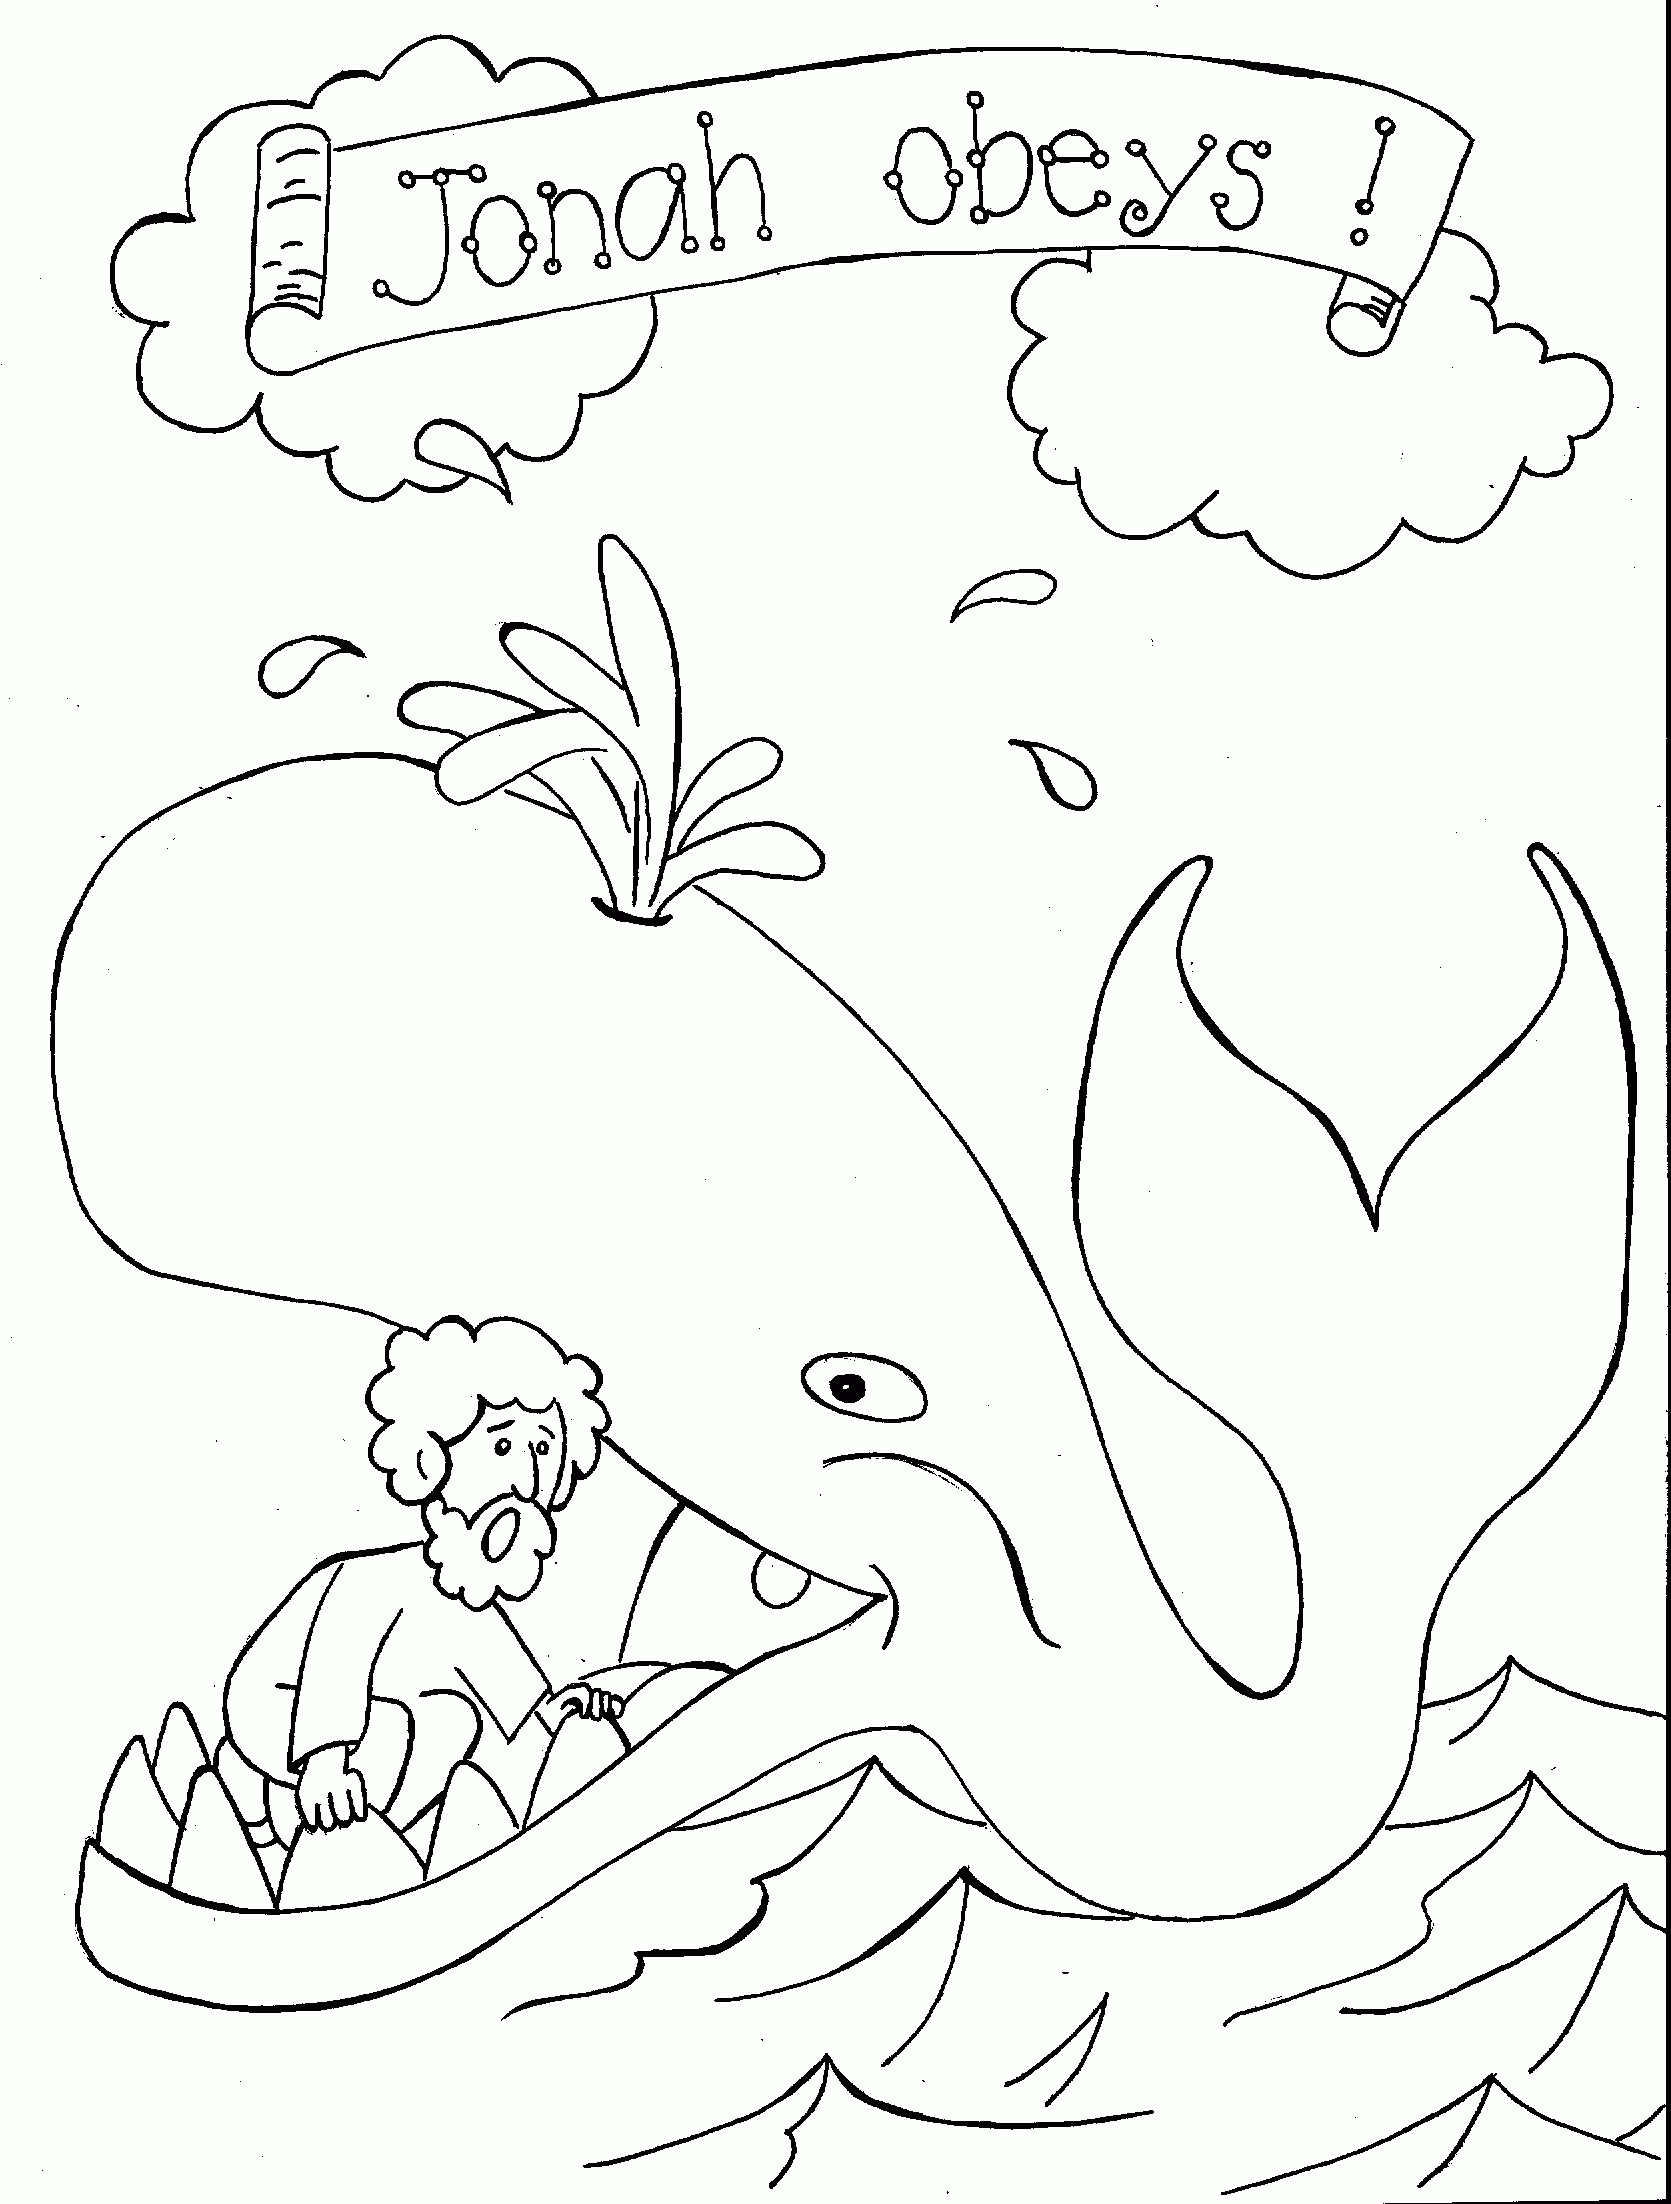 Coloring Pages: 59 Fabulous Bible Story Coloring Pages. Bible Story - Free Printable Bible Story Coloring Pages